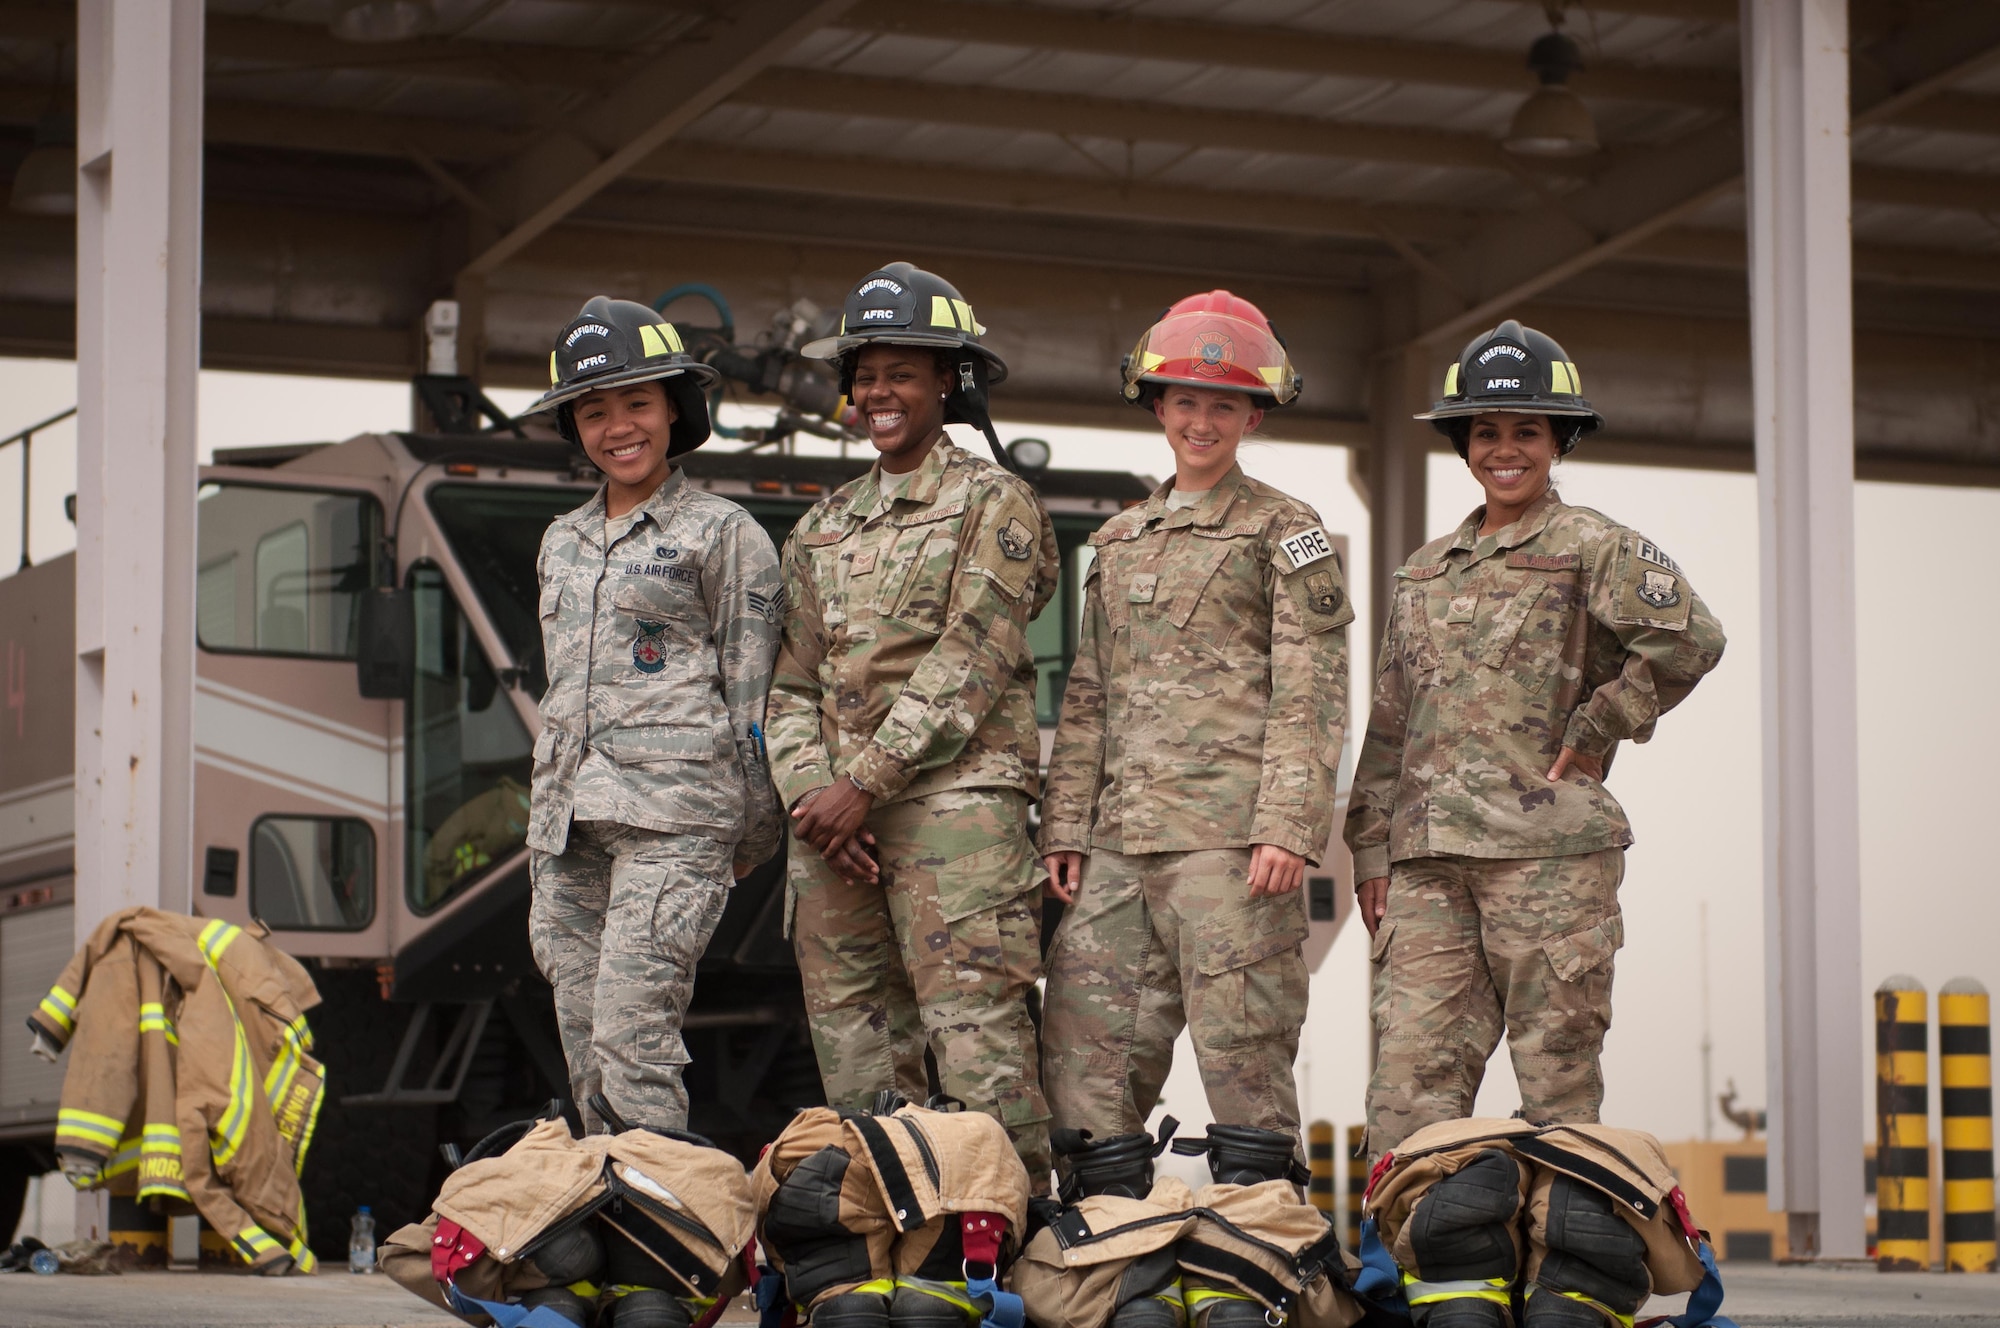 From left to right, Senior Airman Ayanna Gaskin, Senior Airman Christa Dennis, Senior Airman Ashley Eisenbart, and Staff Sgt. Jessica Mendoza, firefighters assigned to the 386th Civil Engineer Squadron, pose for a photo in front of a fire truck at the fire station June 25, 2017, an undisclosed location in Southwest Asia. (U.S. Air Force photo by Master Sgt. Eric M. Sharman)